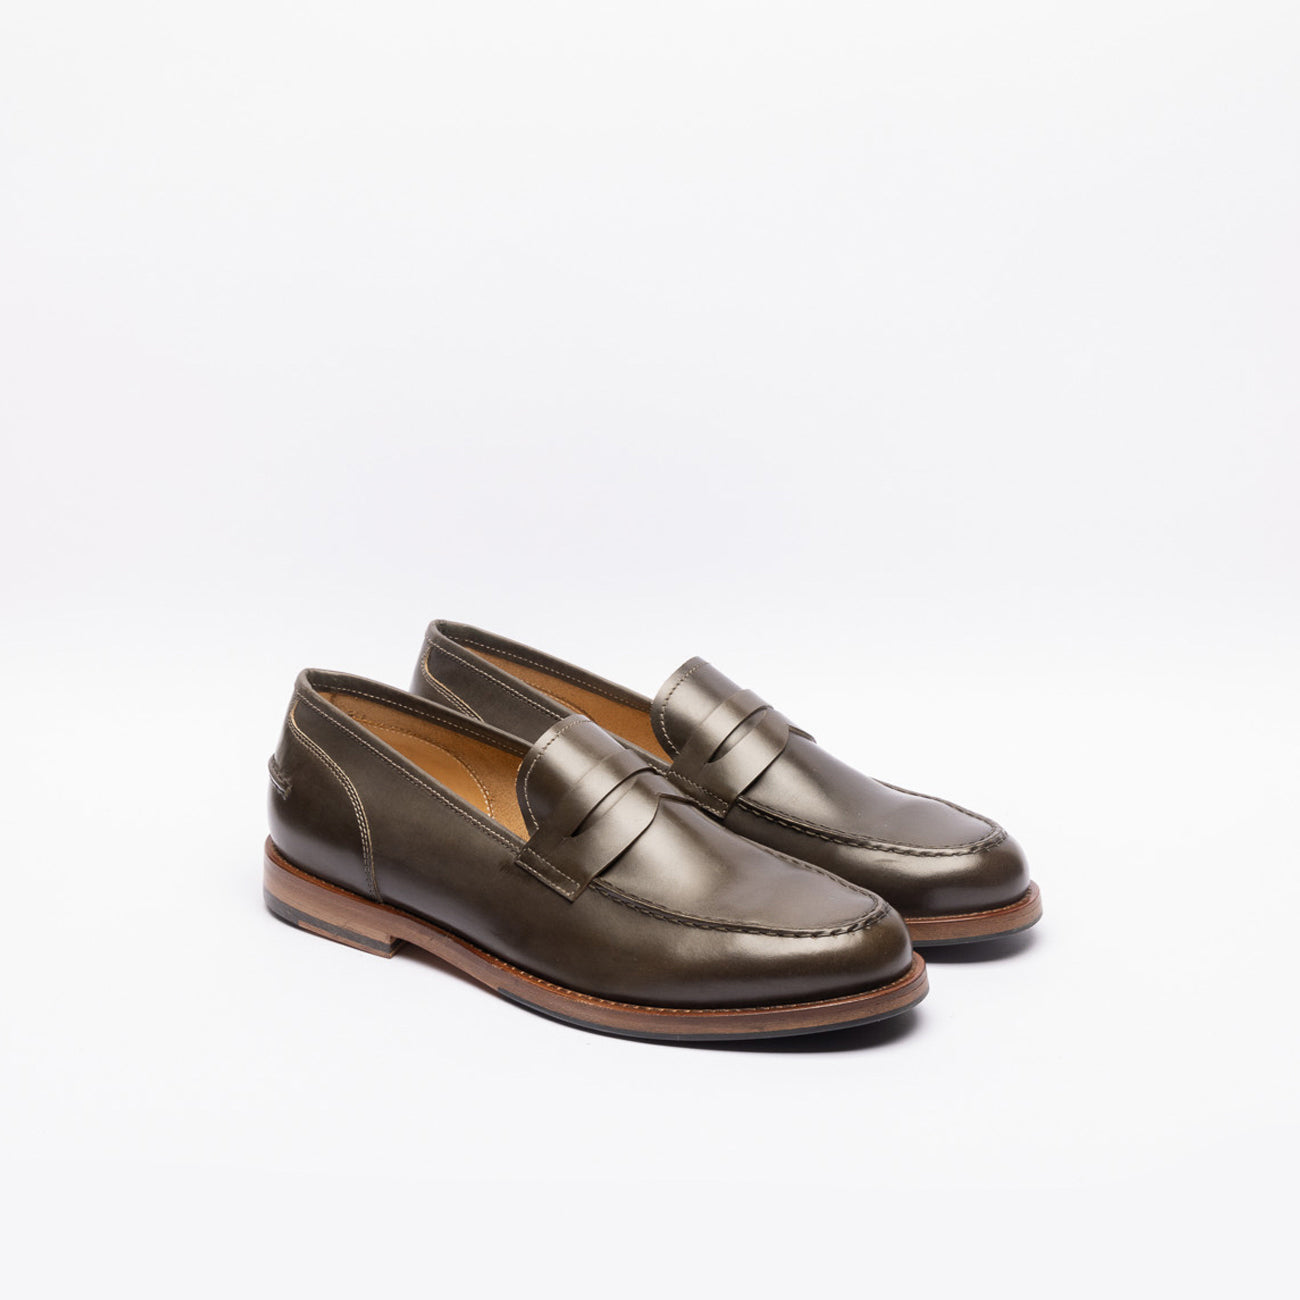 A. Fasciani Zen gray/brown leather penny loafer